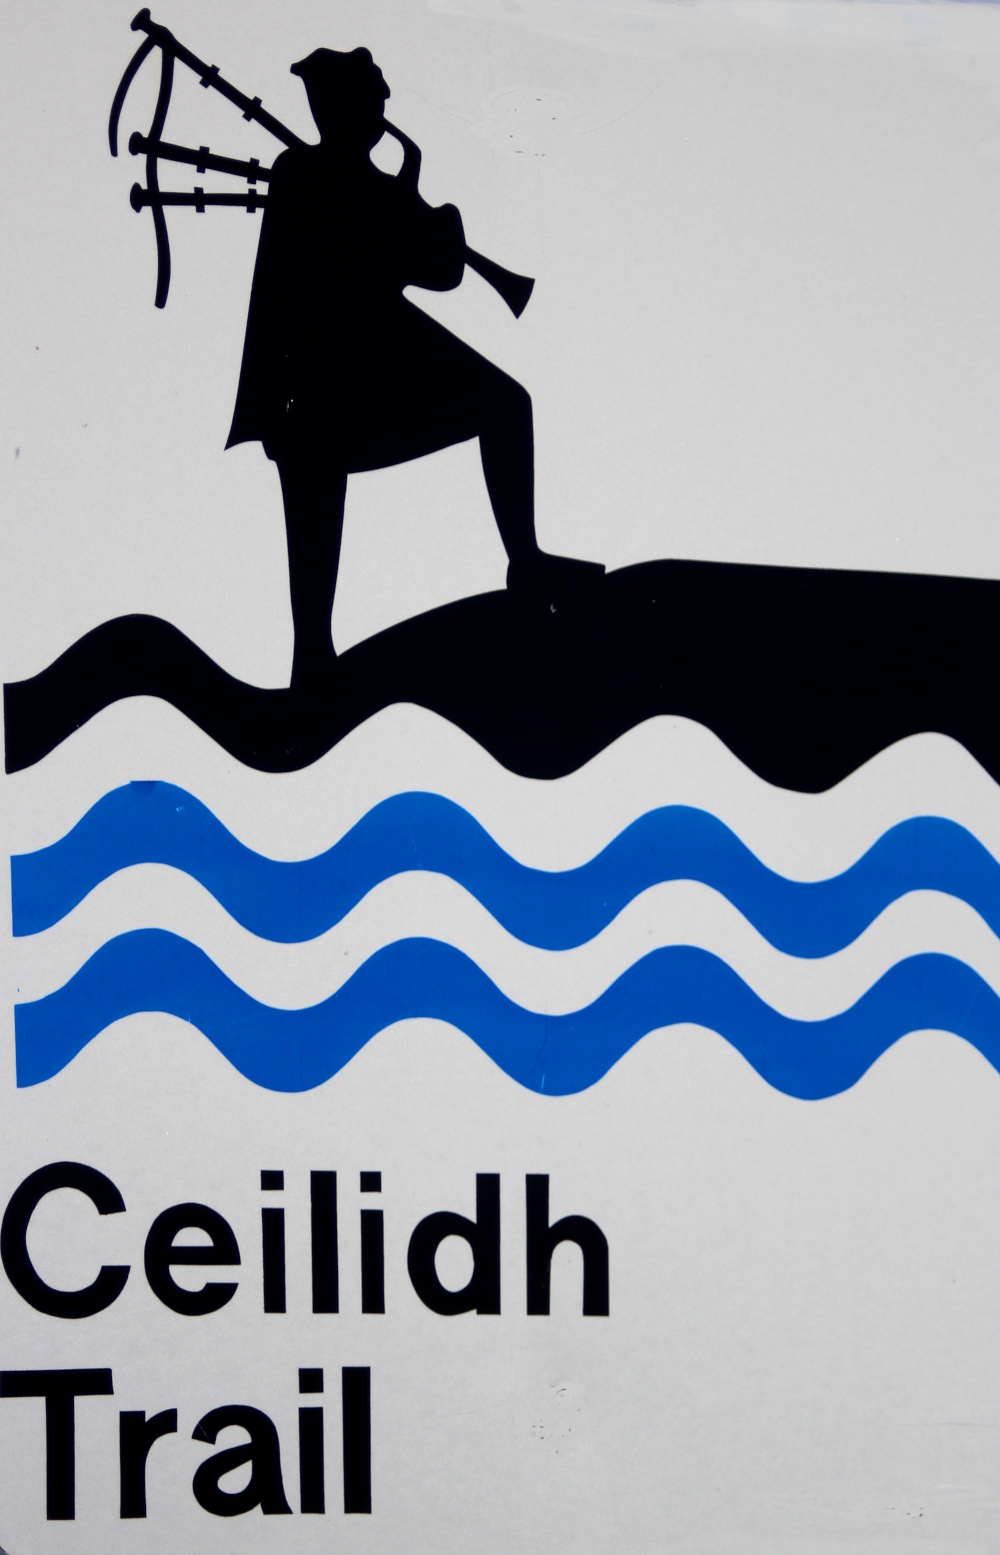 Look for the Ceilidh Trail sign along Route 19 on Cape Breton Island.